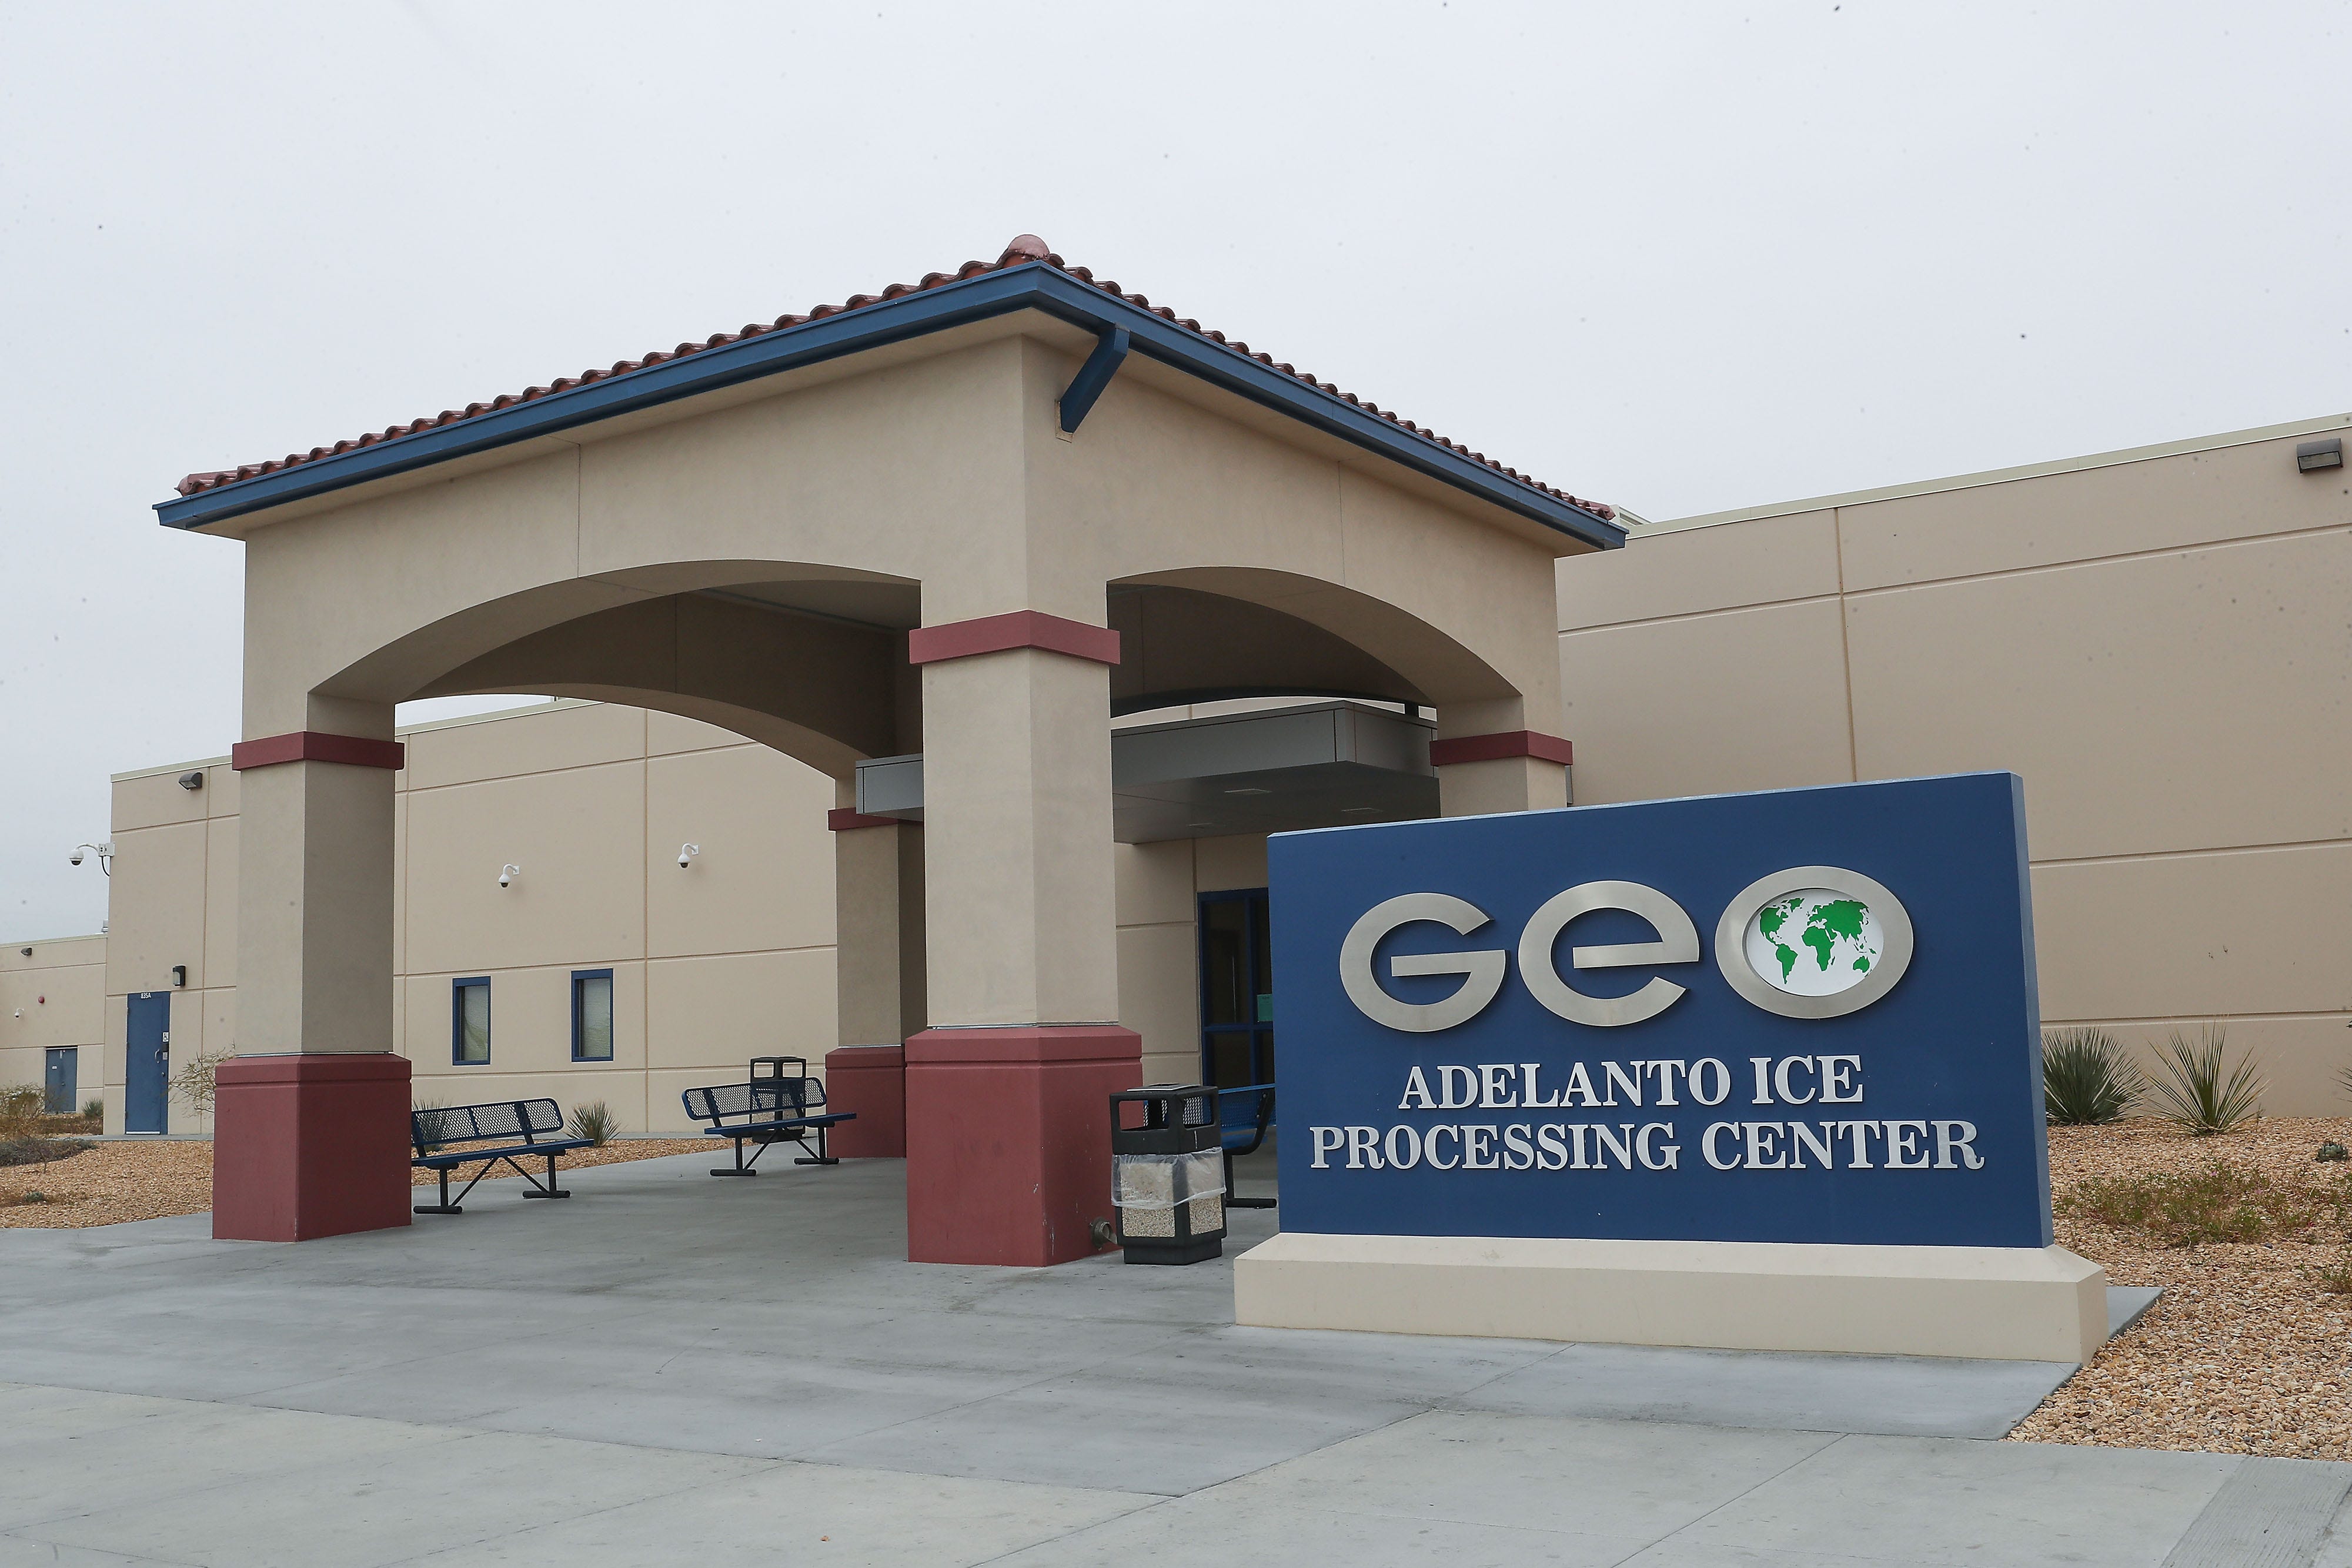 The GEO Group, a private company, operates the U.S. Immigration and Customs Enforcement's (ICE) Adelanto processing Center in Adelanto, California.